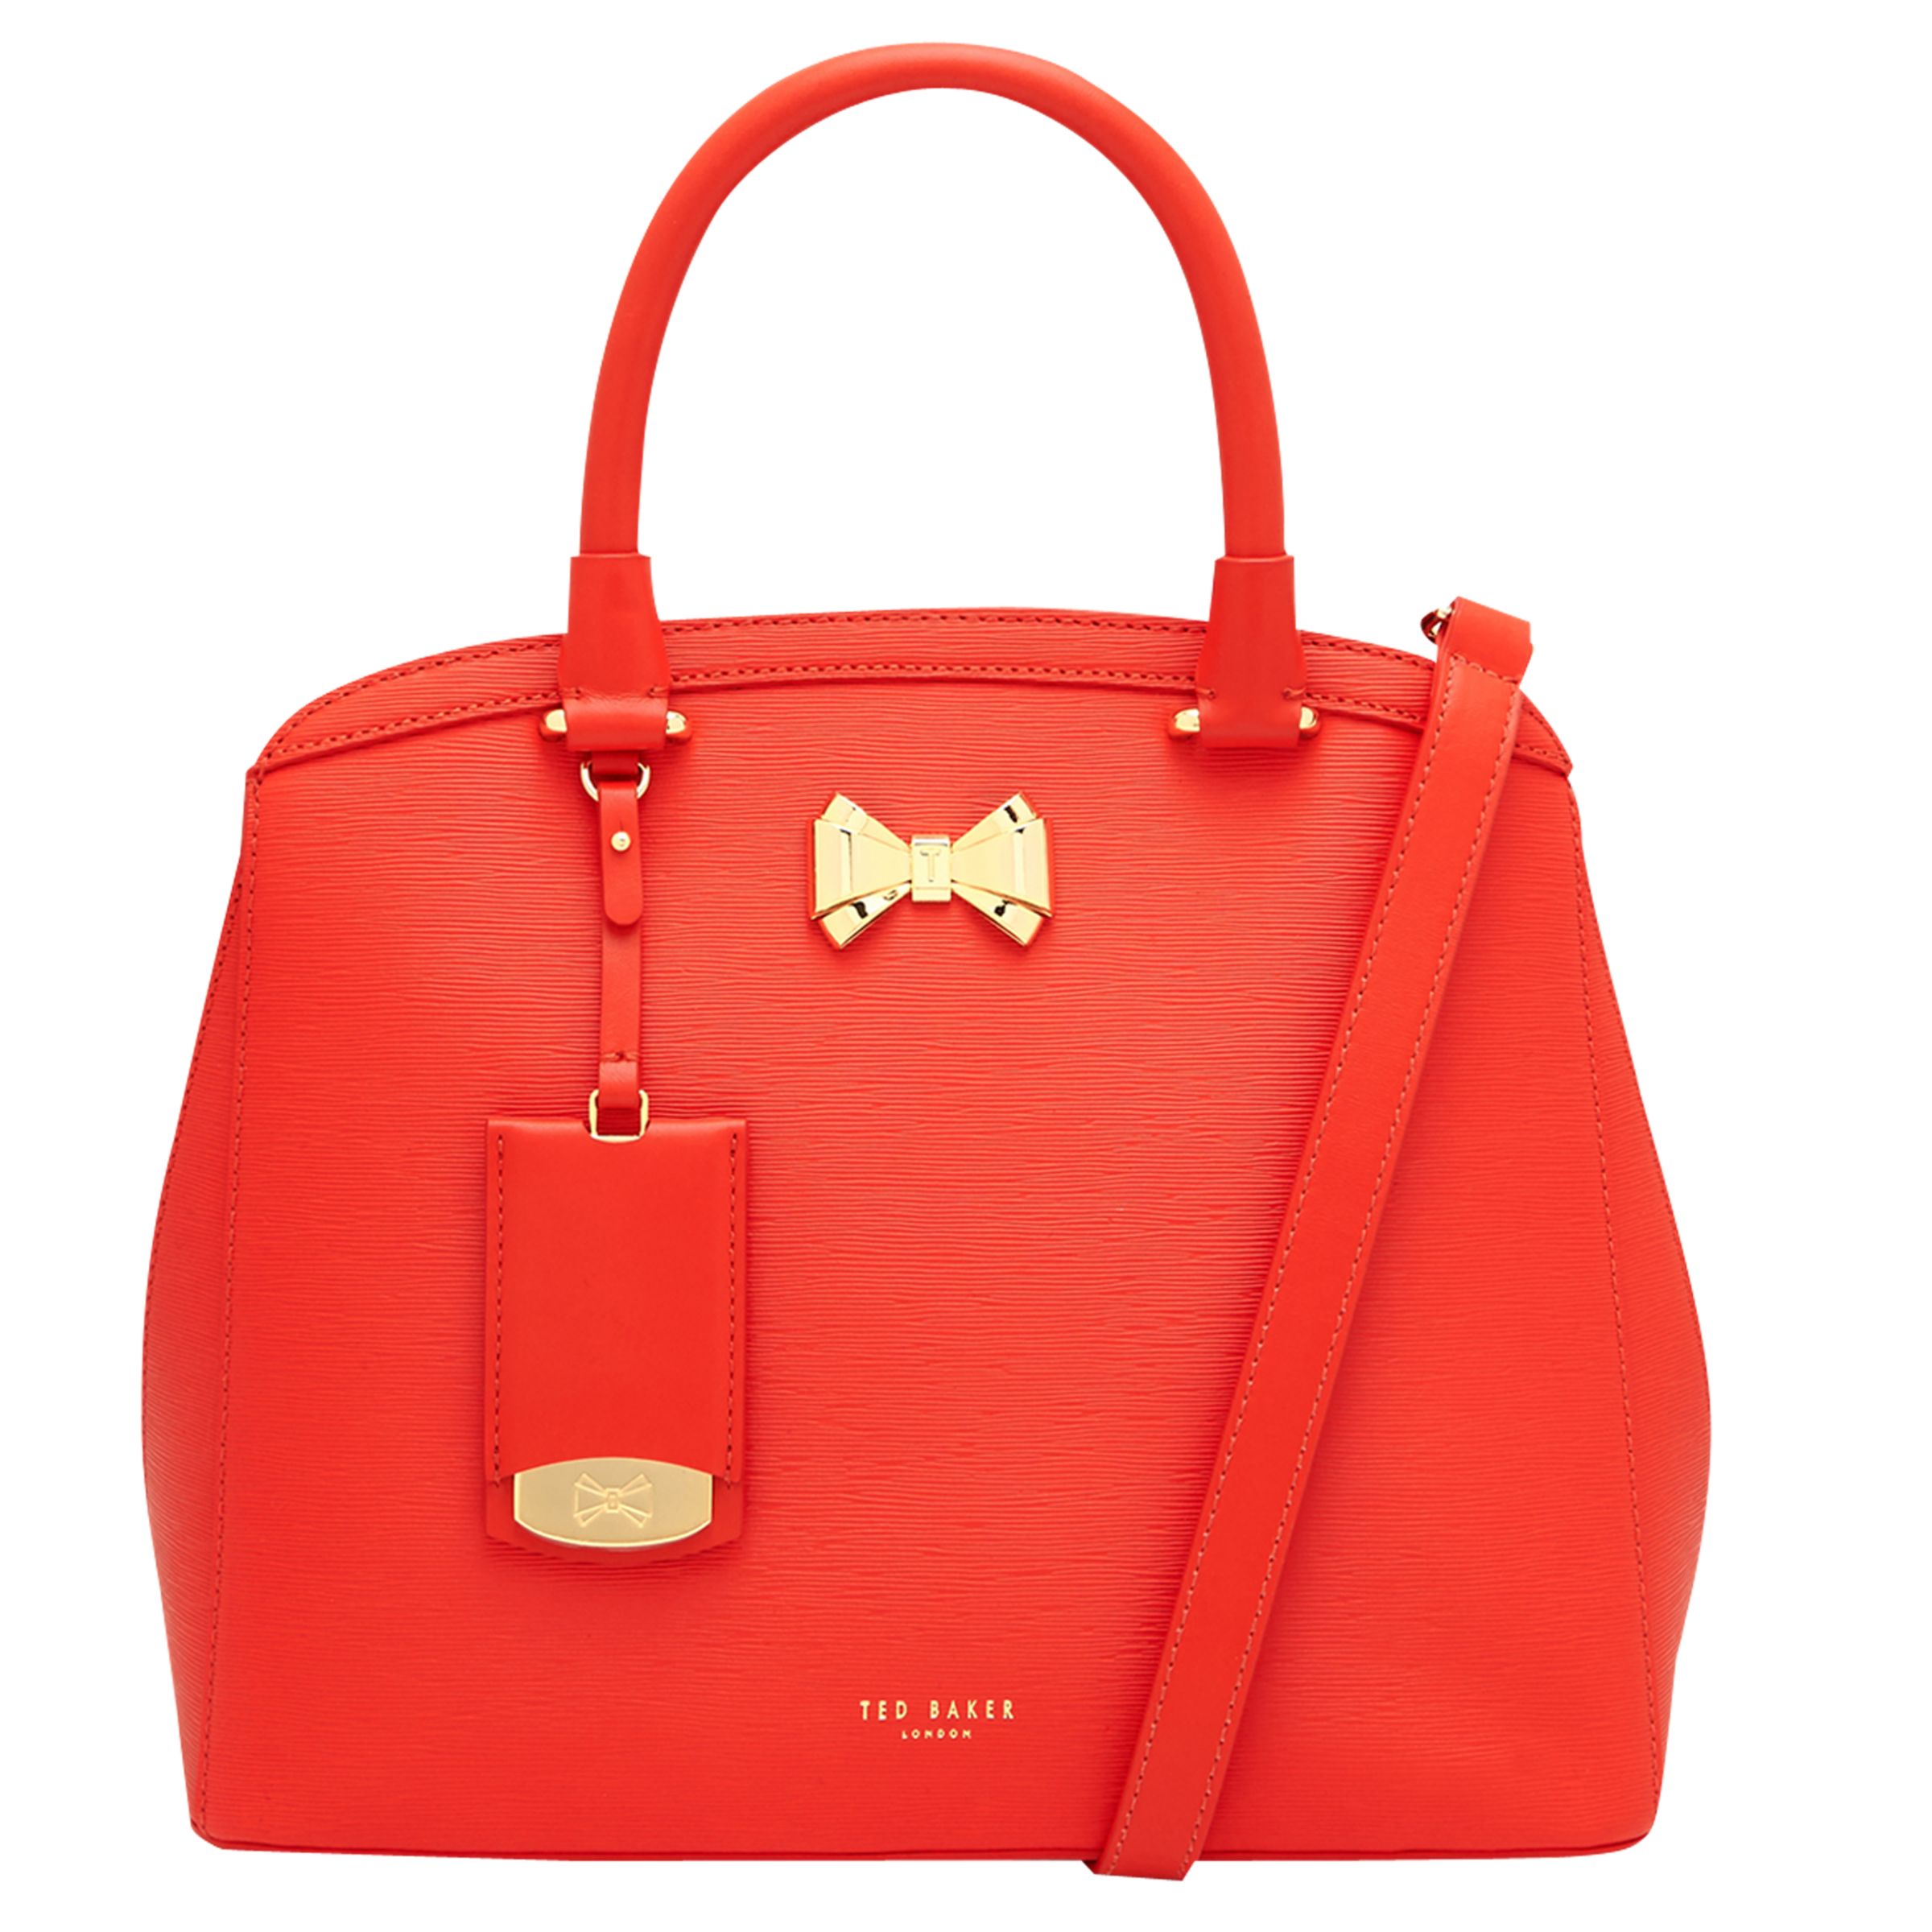 Ted Baker Tealia Curved Bow Small Leather Tote Bag, Bright Orange